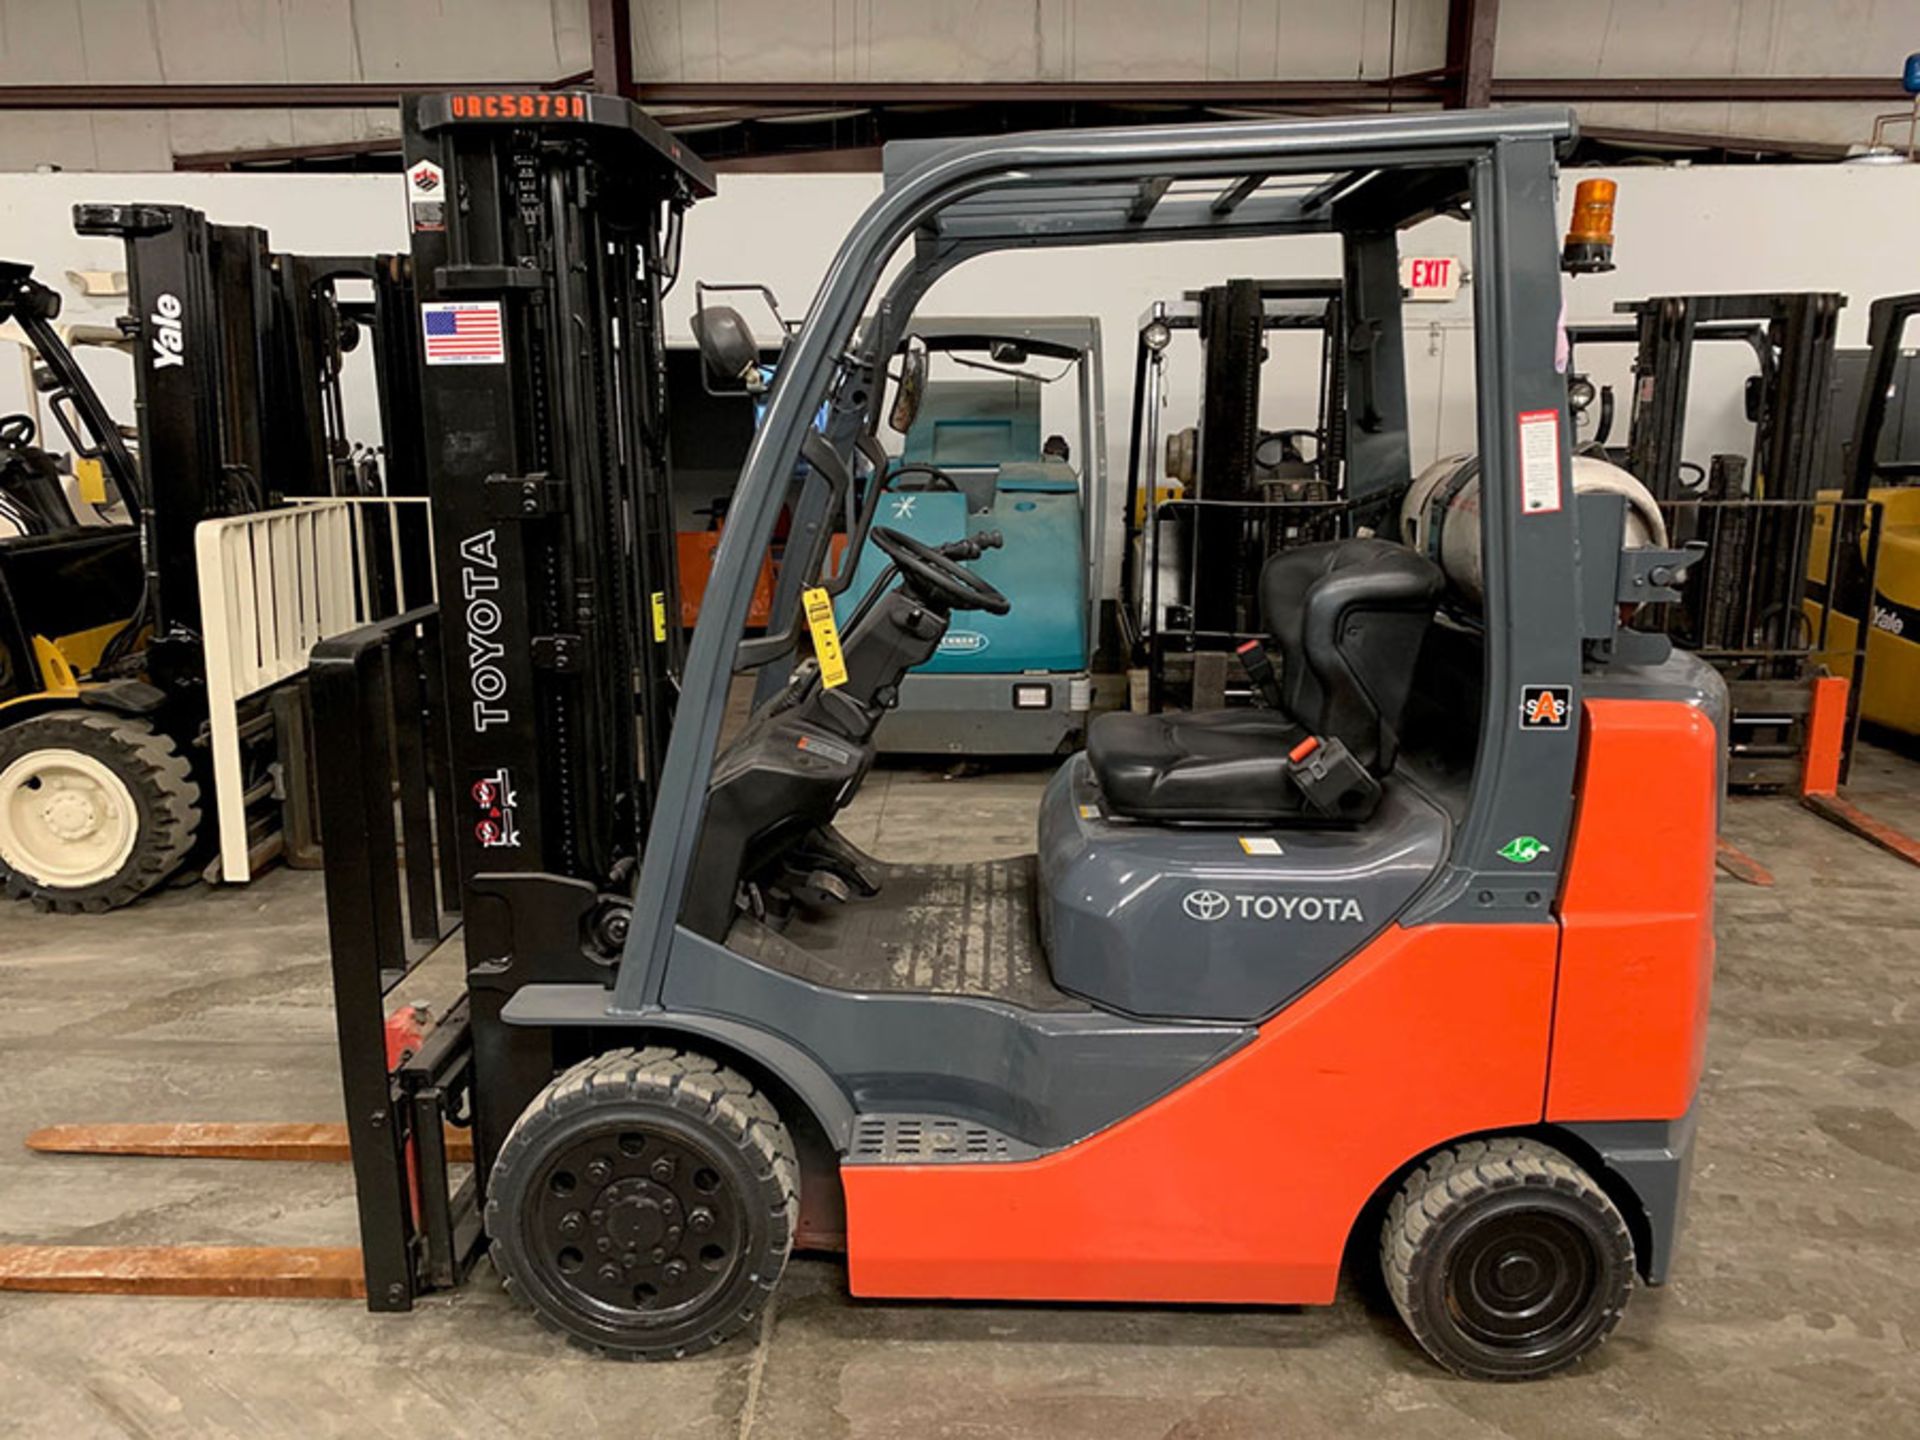 2012 TOYOTA 5,000 LB. CAPACITY FORKLIFT, MODEL: 8FGCU25, LPG, 3-STAGE, SS, RECONDITIONED BY TOYOTA